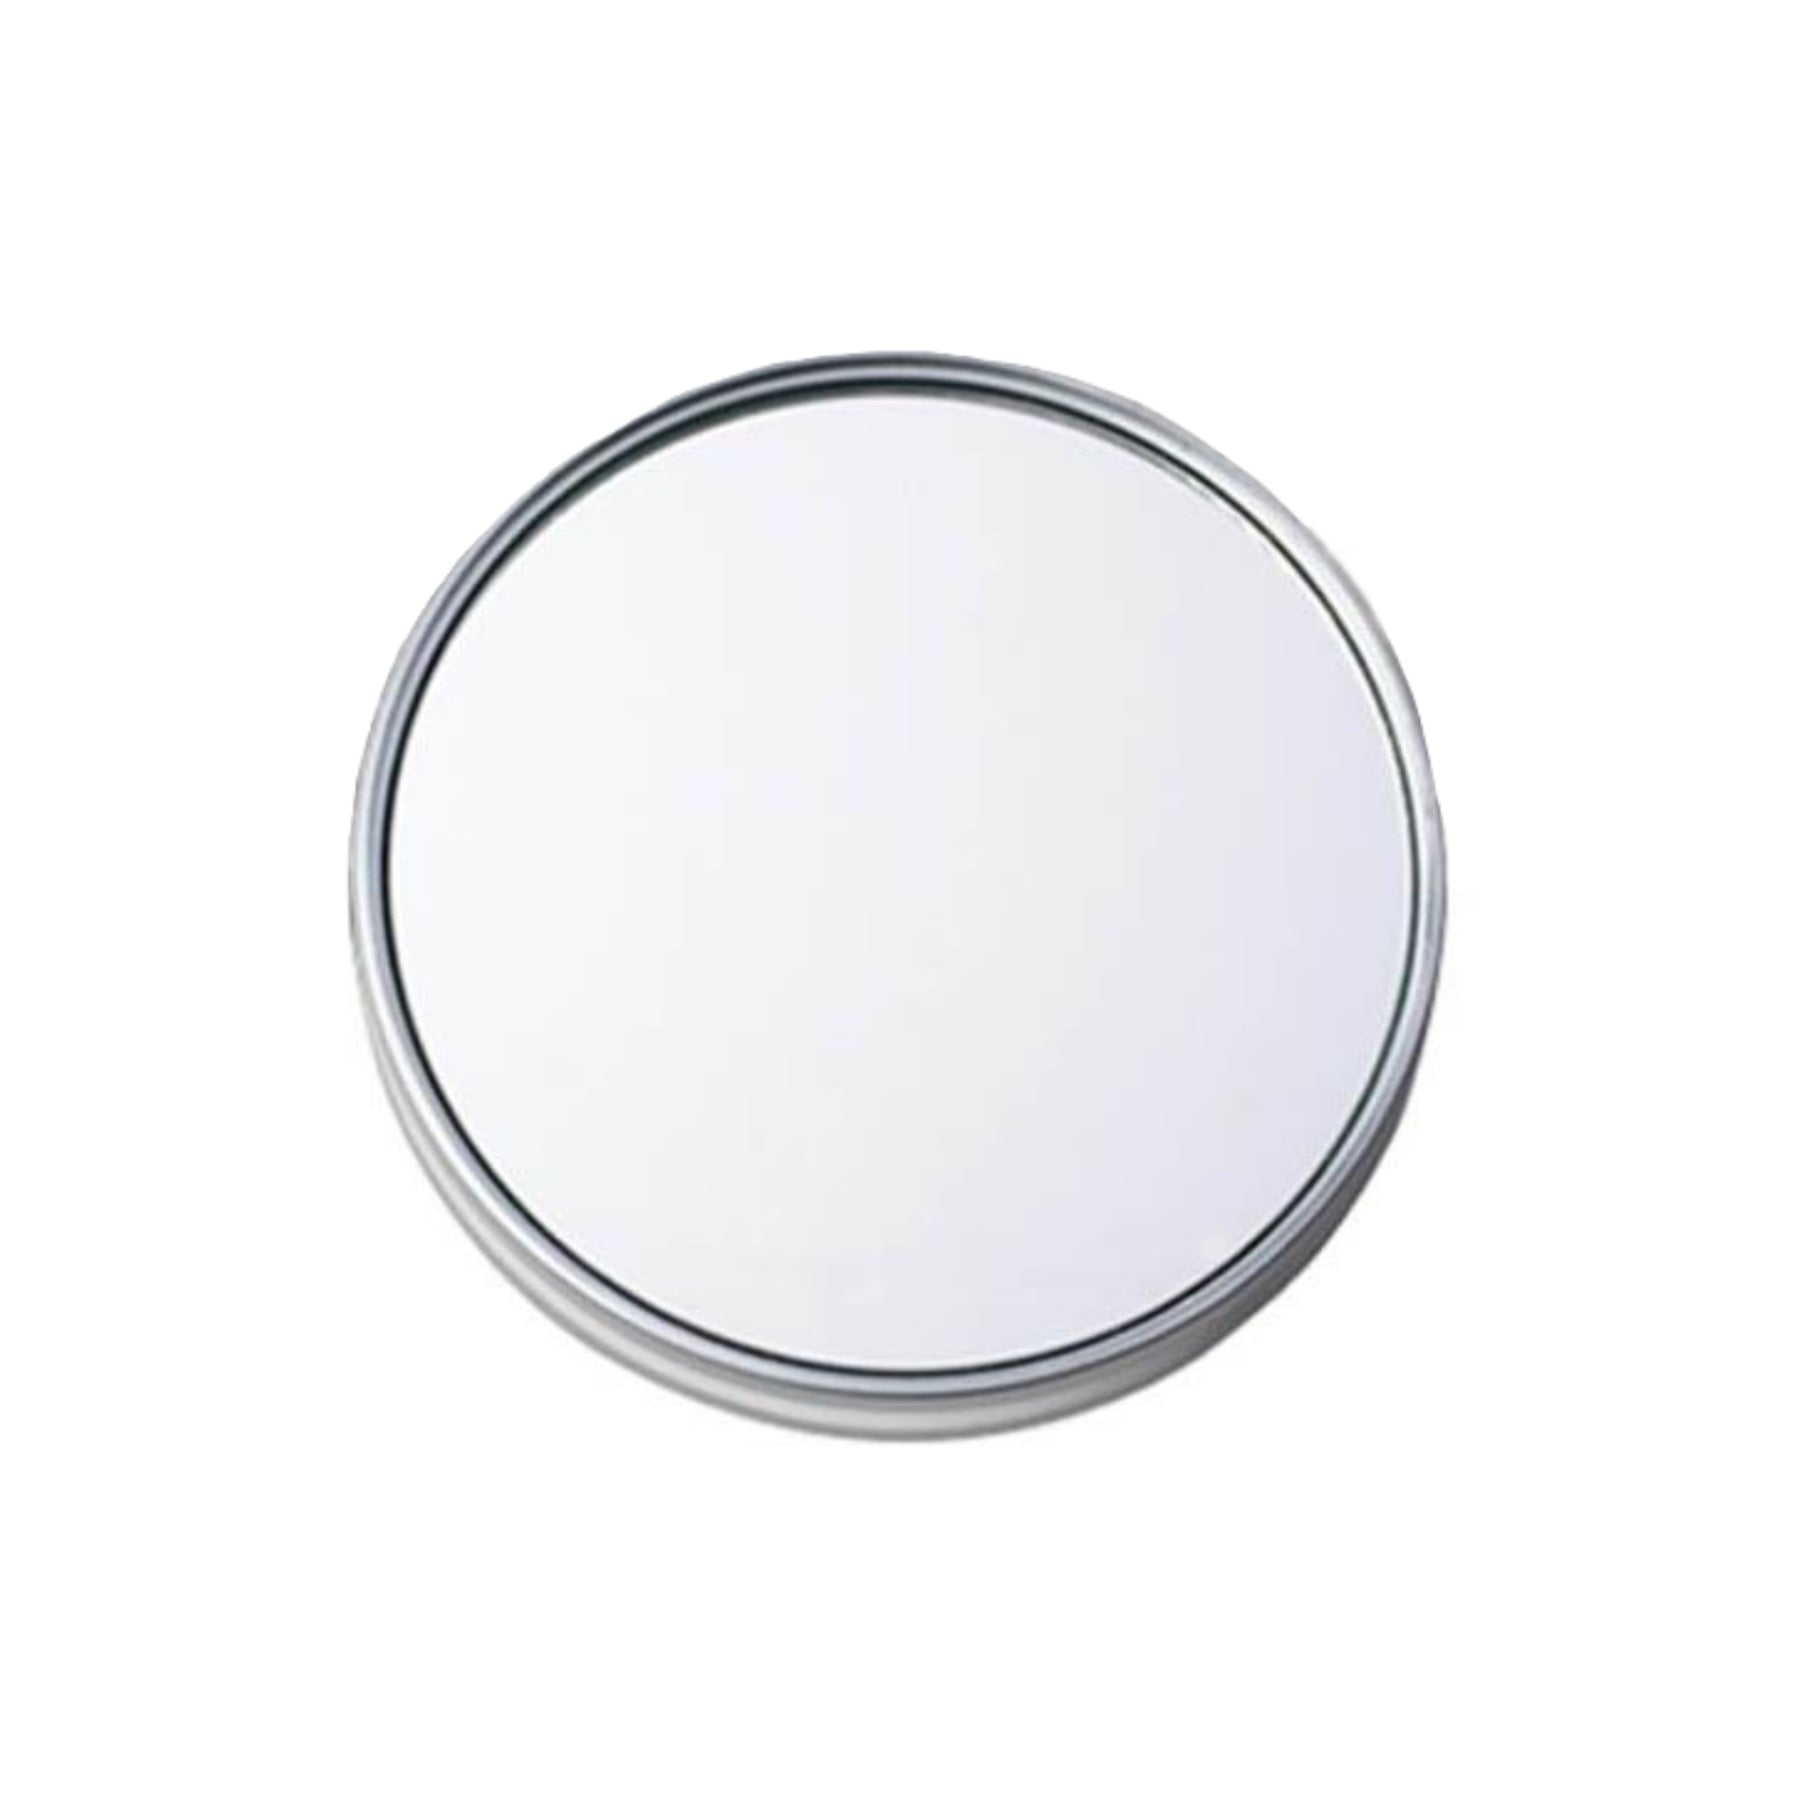 Suction Cup Mirror – Silver – 20x Magnification